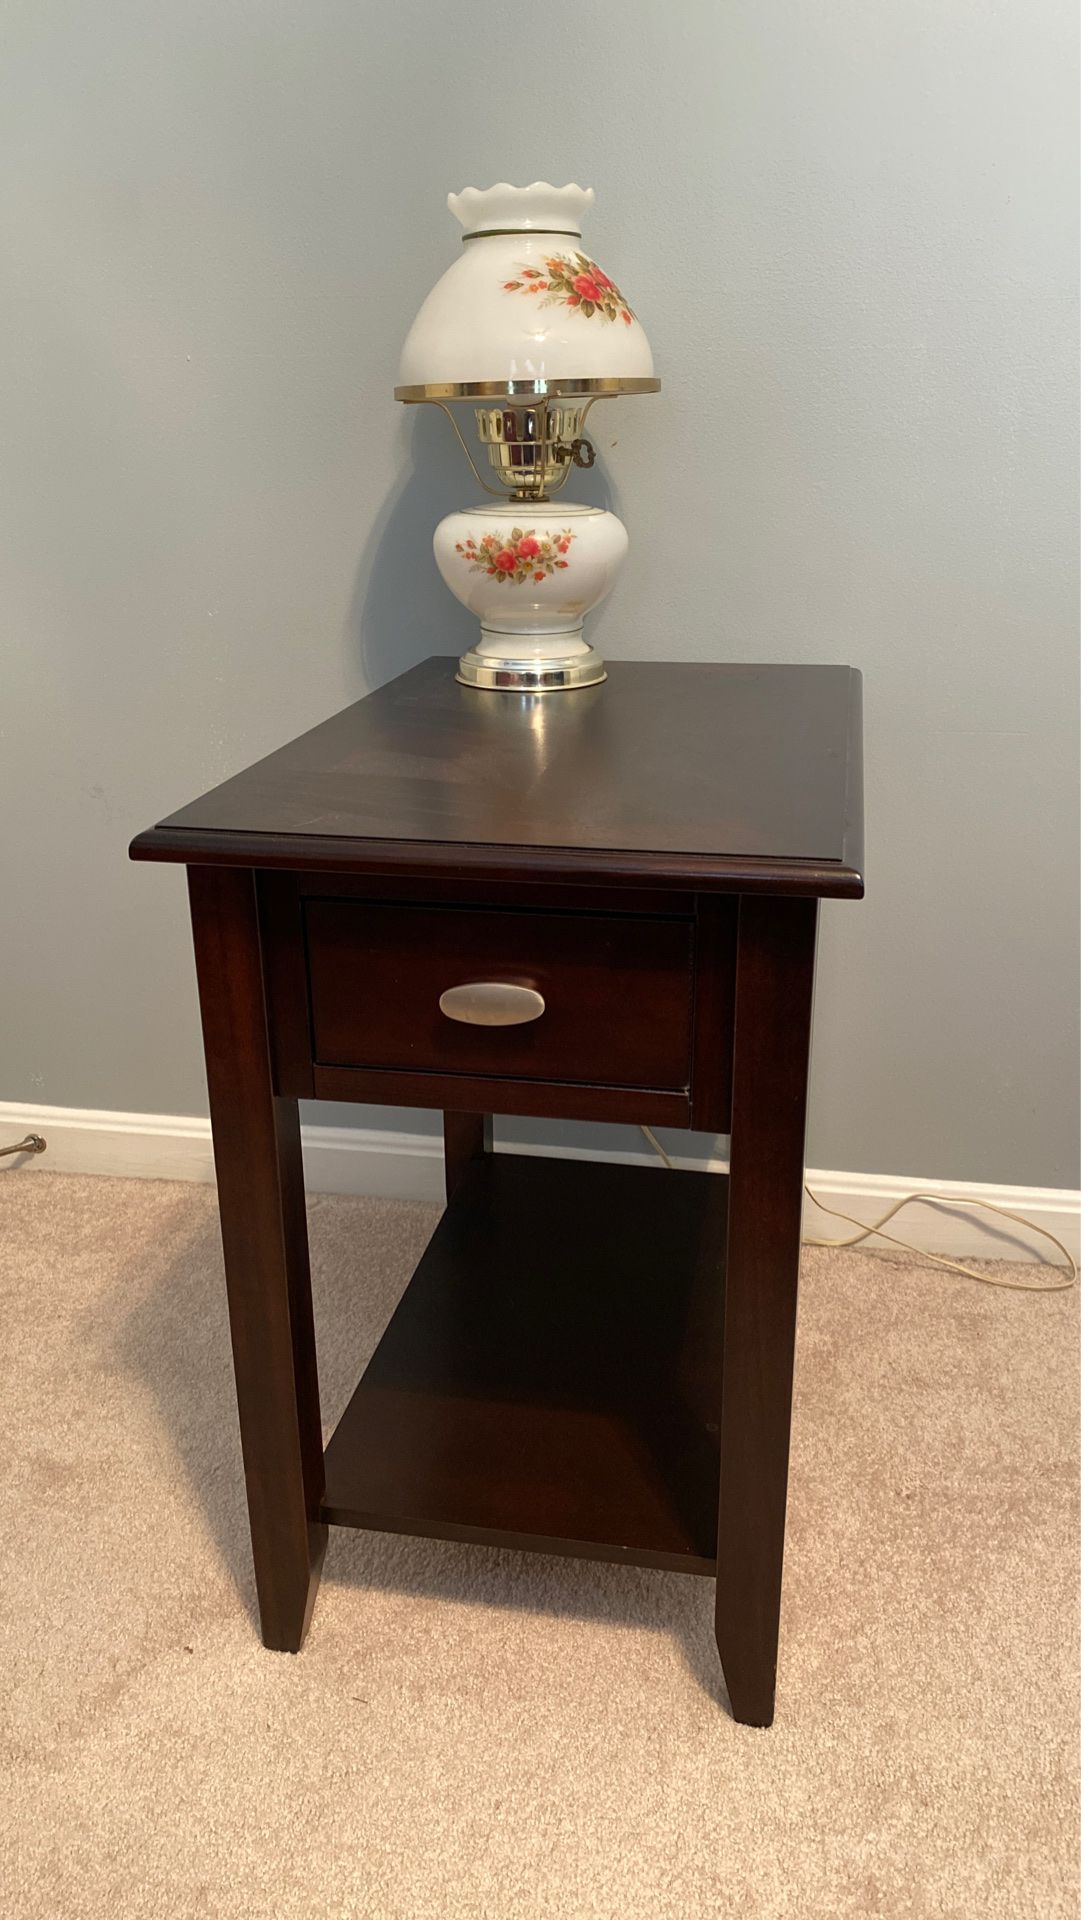 Solid oak end table